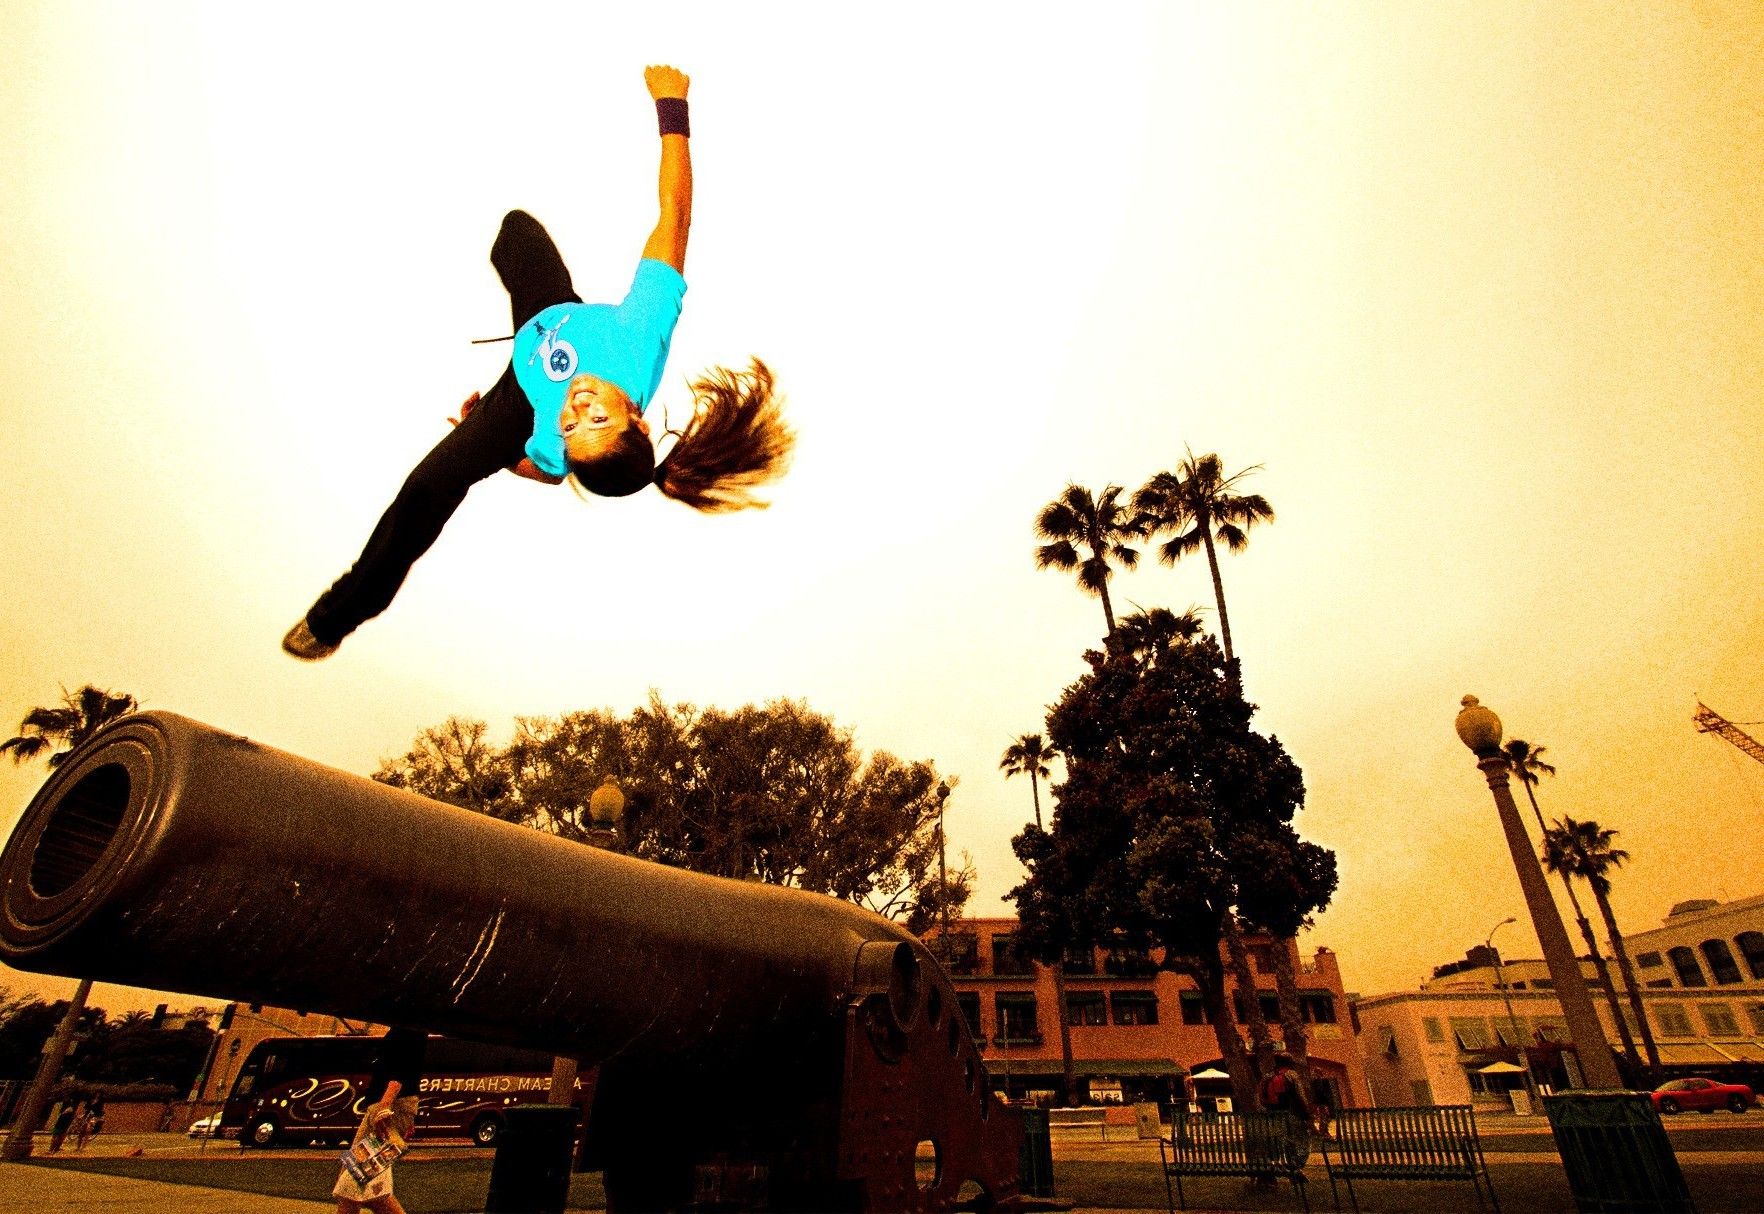 Parkour. She performs a side flip with obstacles